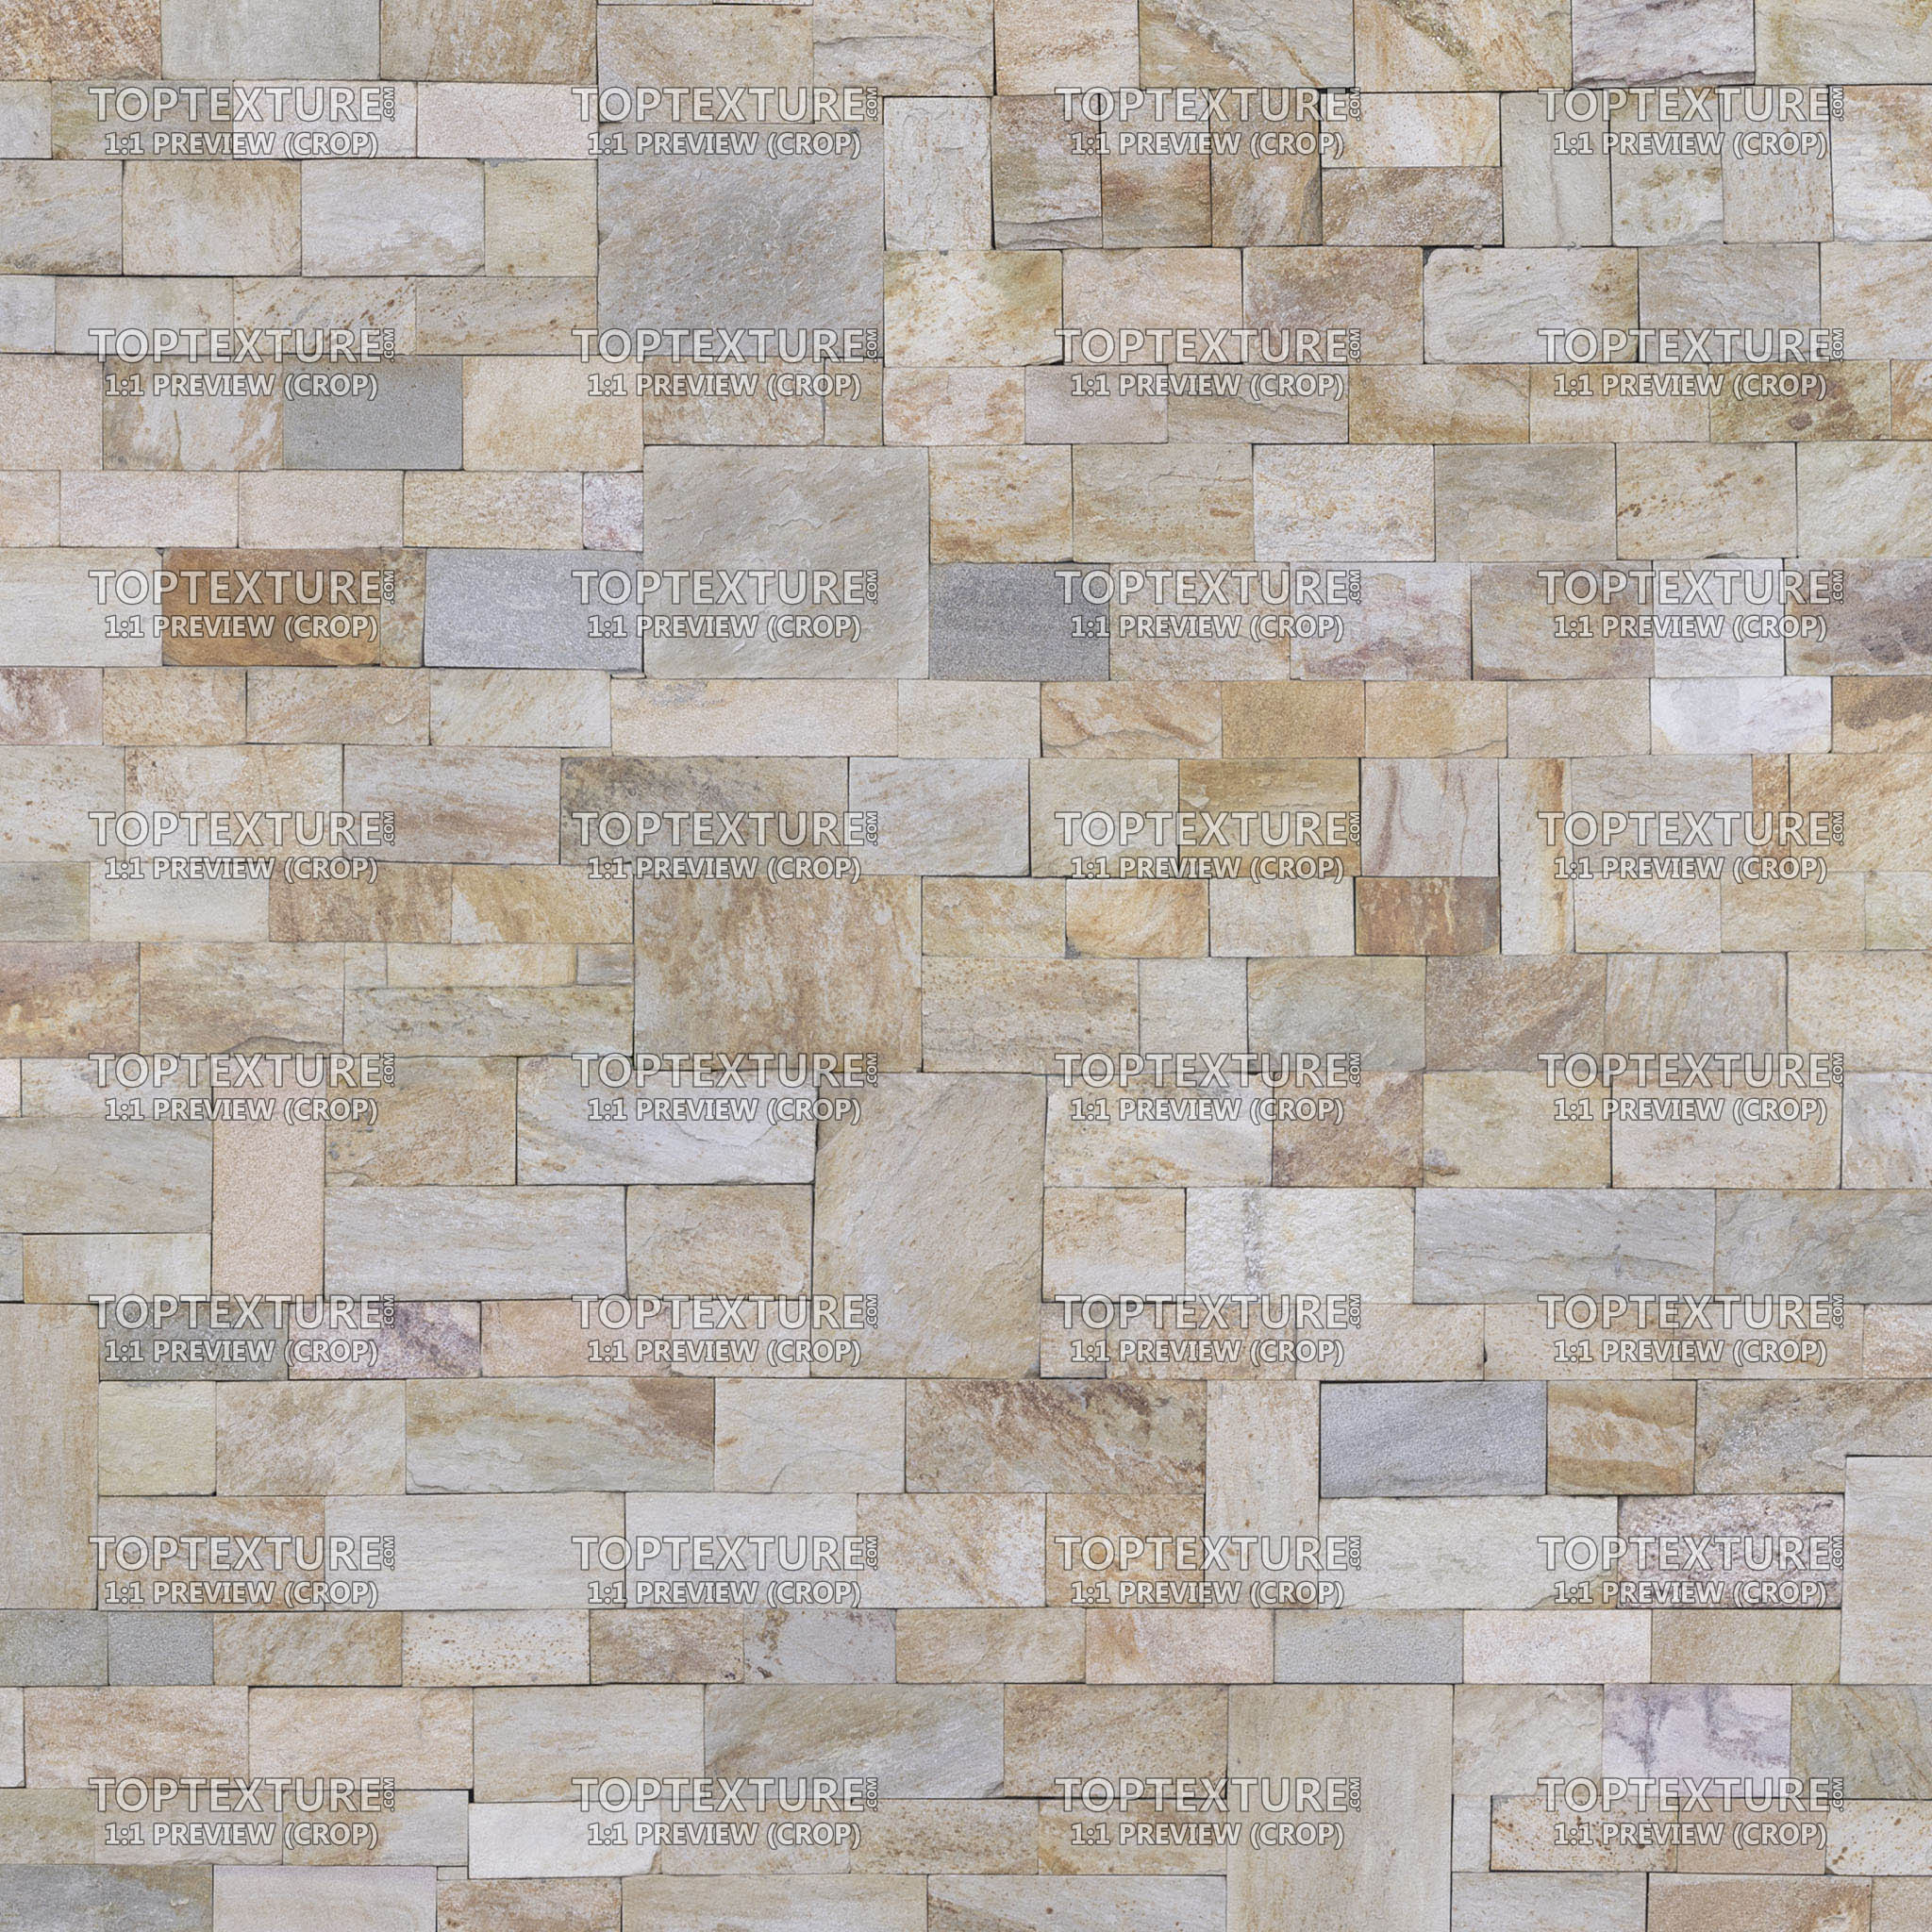 Rectangular Stone Wall Tiles of Different Sizes - 100% zoom